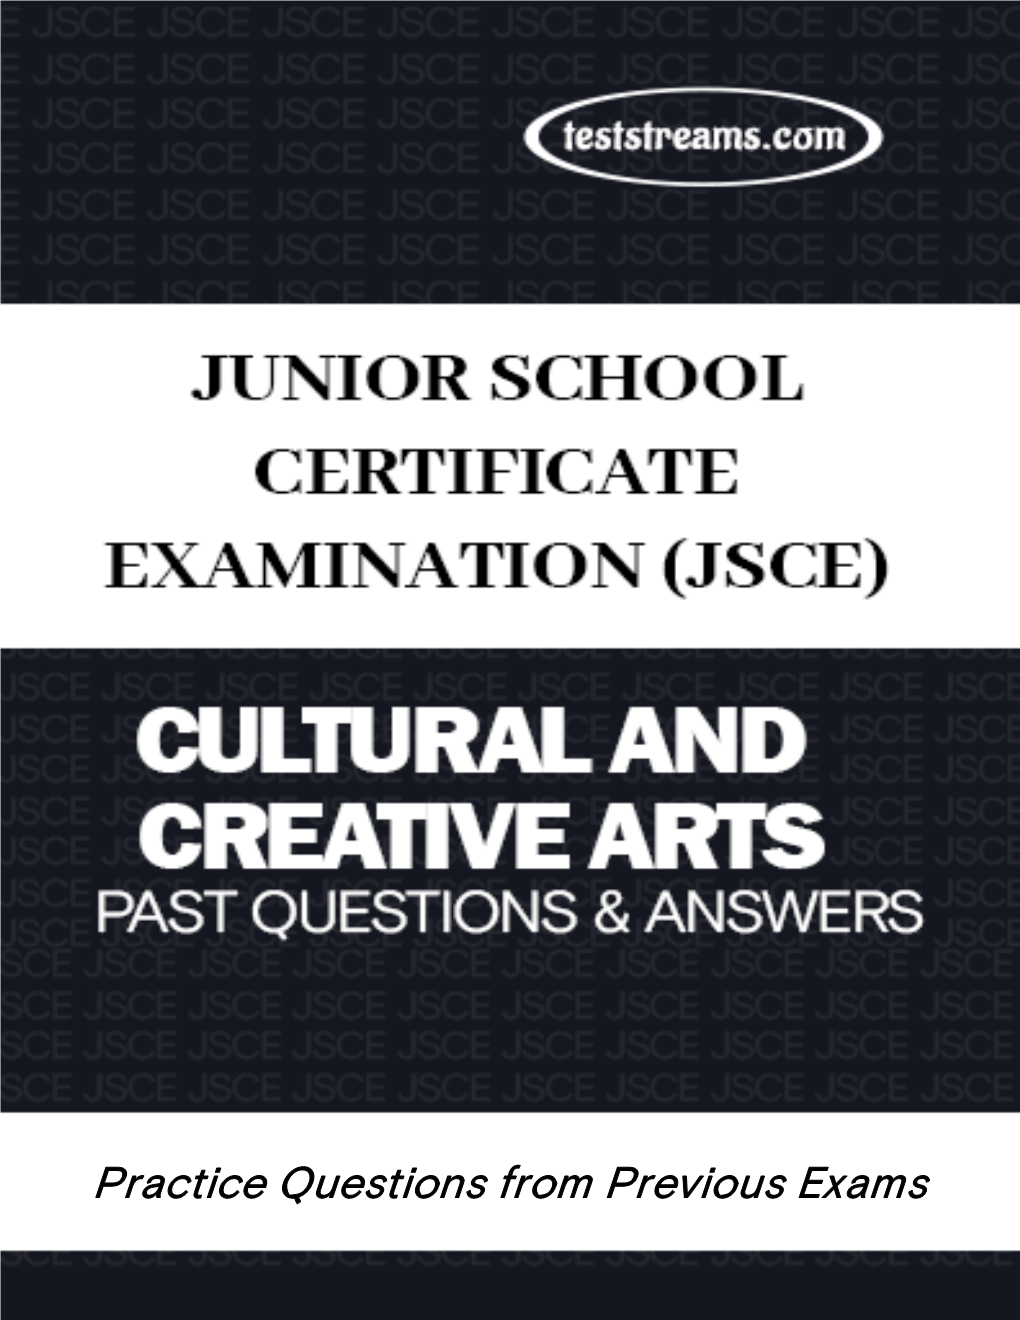 Practice Questions from Previous Exams CULTURE and CREATIVE ARTS (PAPER 1) 1